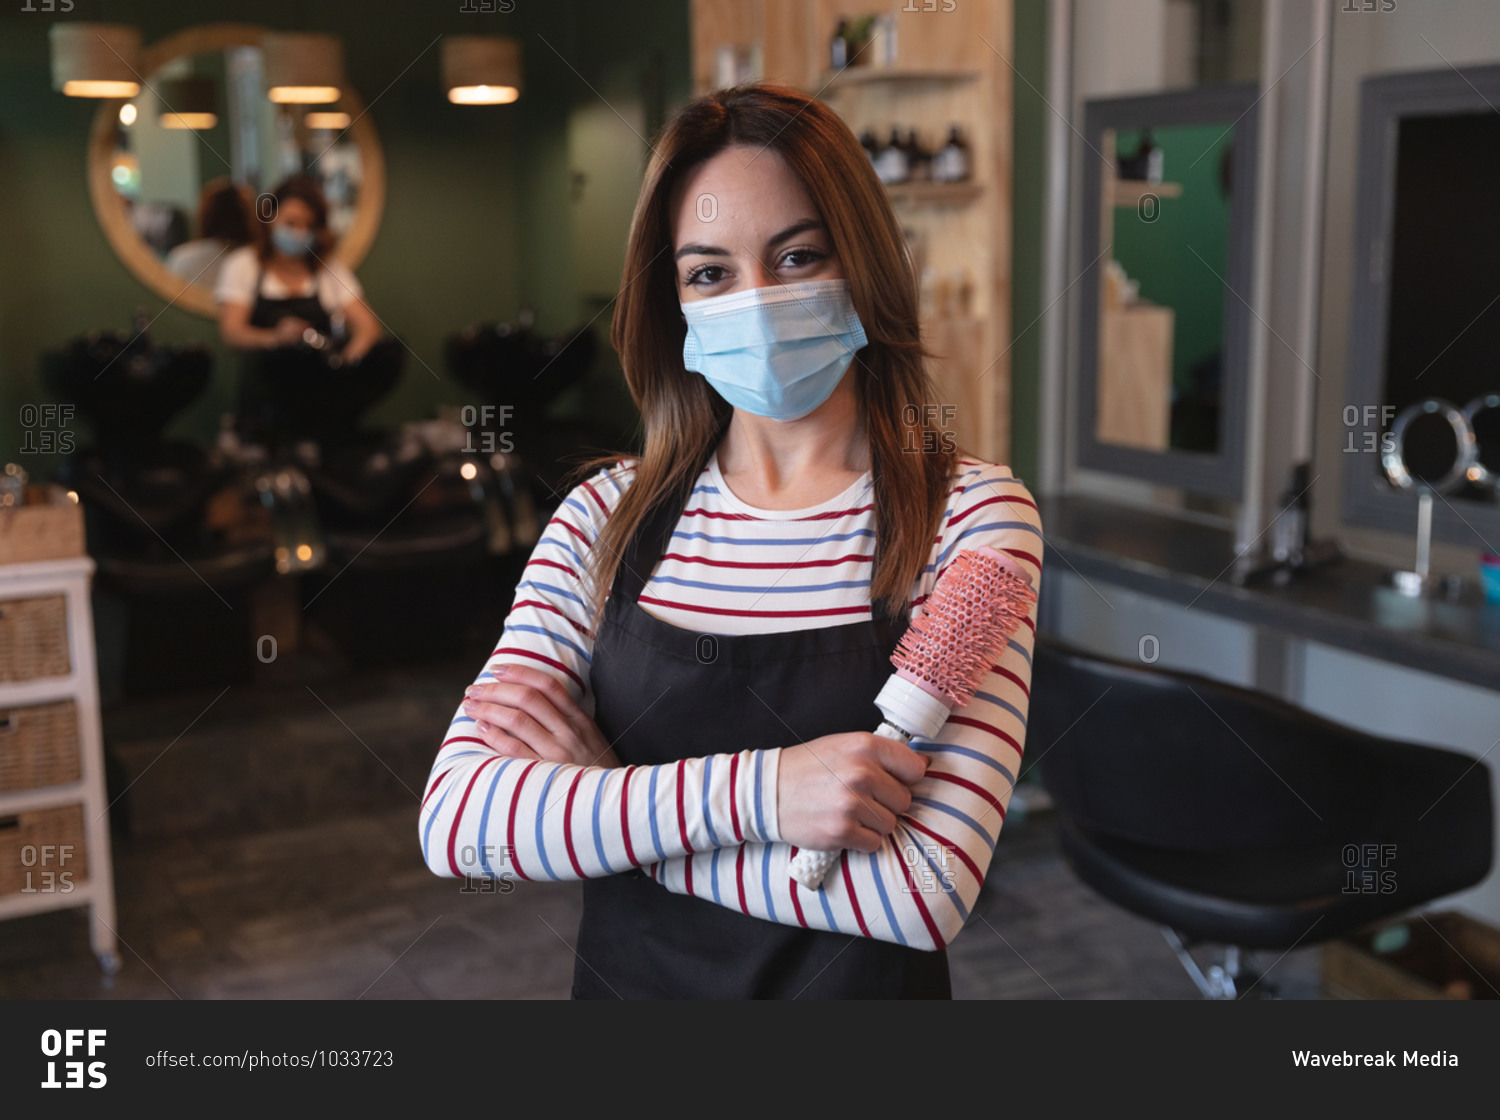 Portrait of a Caucasian female hairdresser working in hair salon wearing face mask, posing for a photo, holding a hairbrush. Health and hygiene in workplace during Coronavirus Covid 19 pandemic.